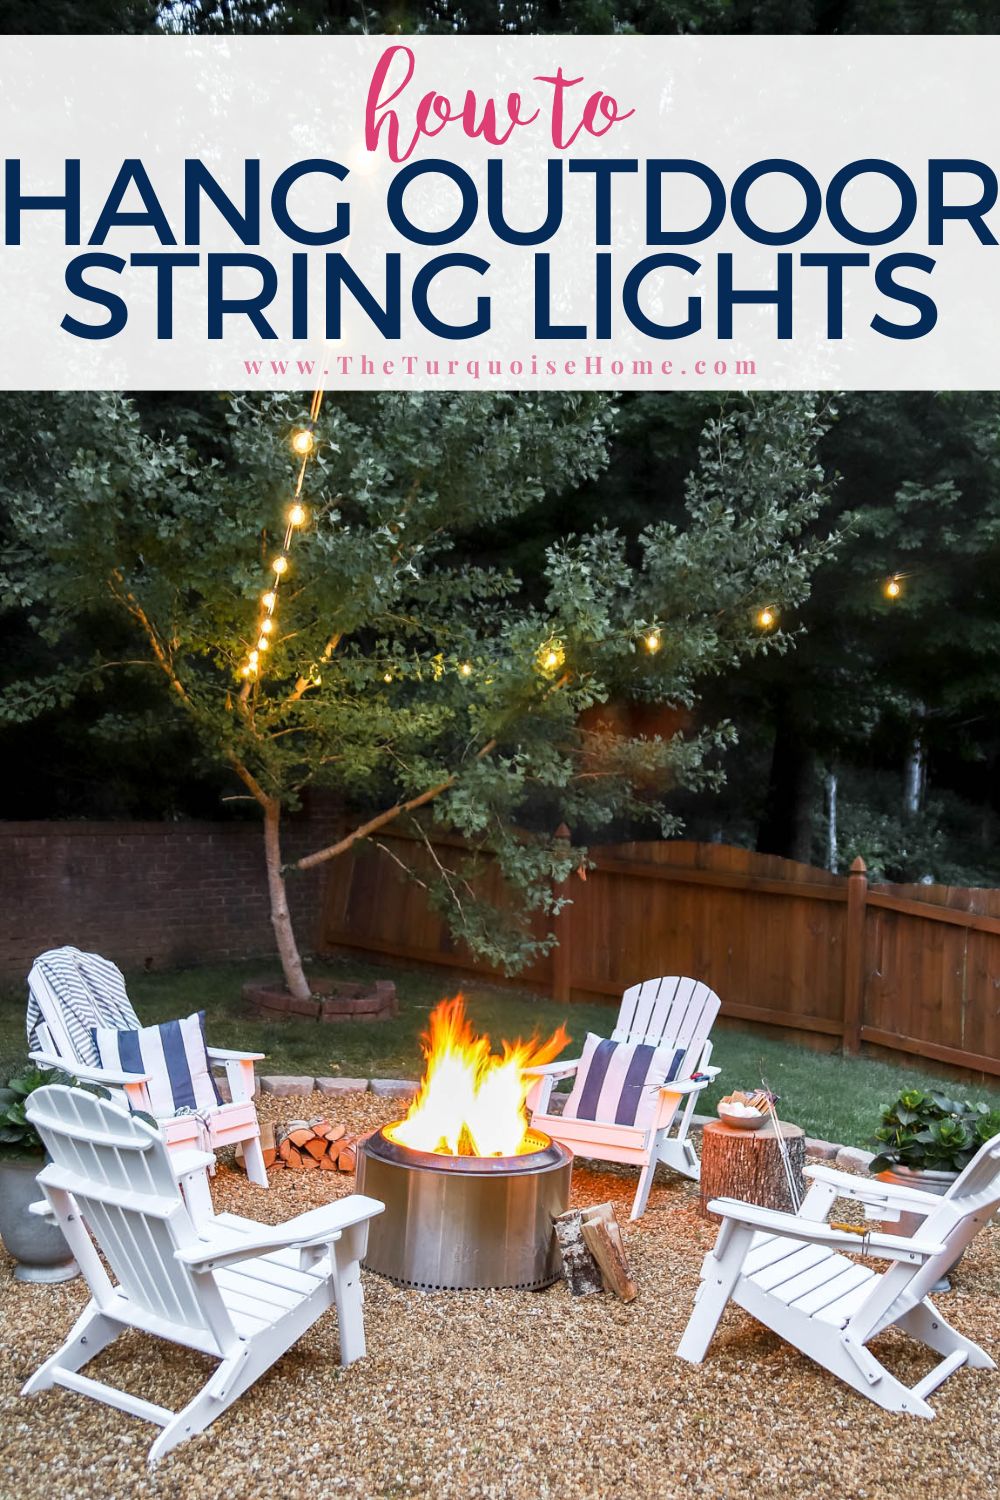 How to Hang Outdoor String Lights in 3 Easy Steps